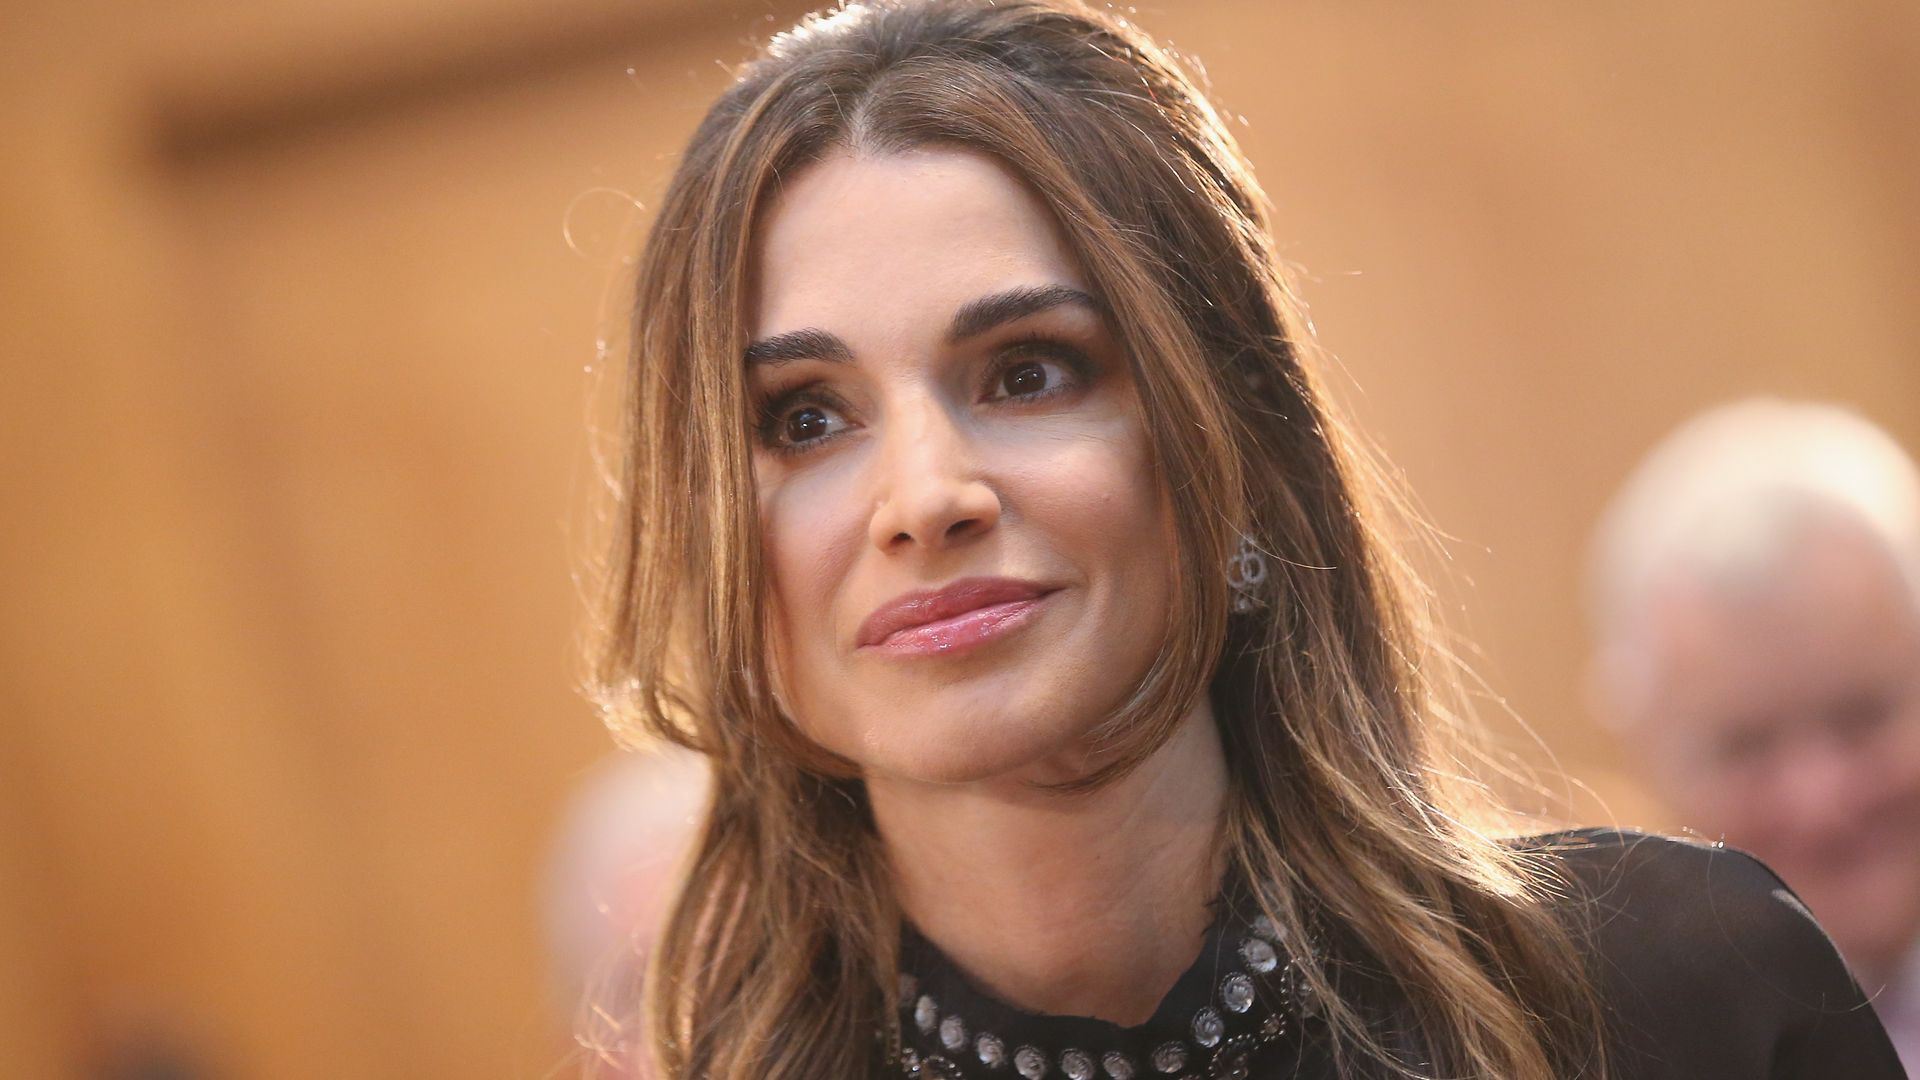 Queen Rania of Jordan in a black dress with curled hair